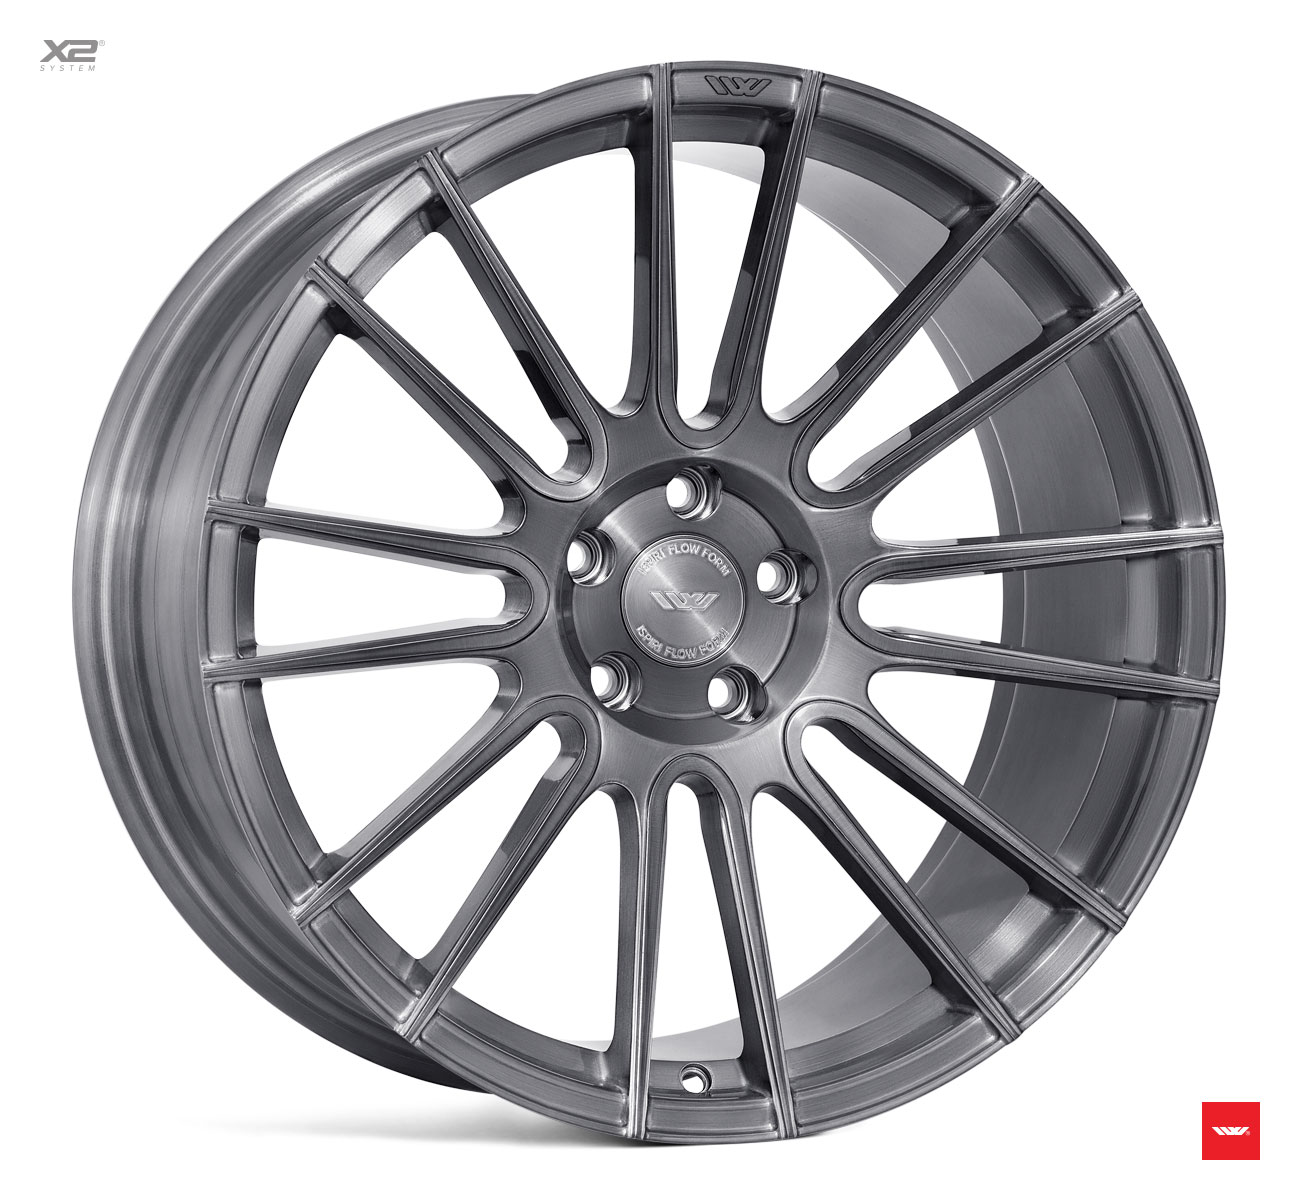 NEW 20  ISPIRI FFR8 8 TWIN CURVED SPOKE ALLOY WHEELS IN FULL BRUSHED CARBON TITANIUM  WIDER 10  REAR